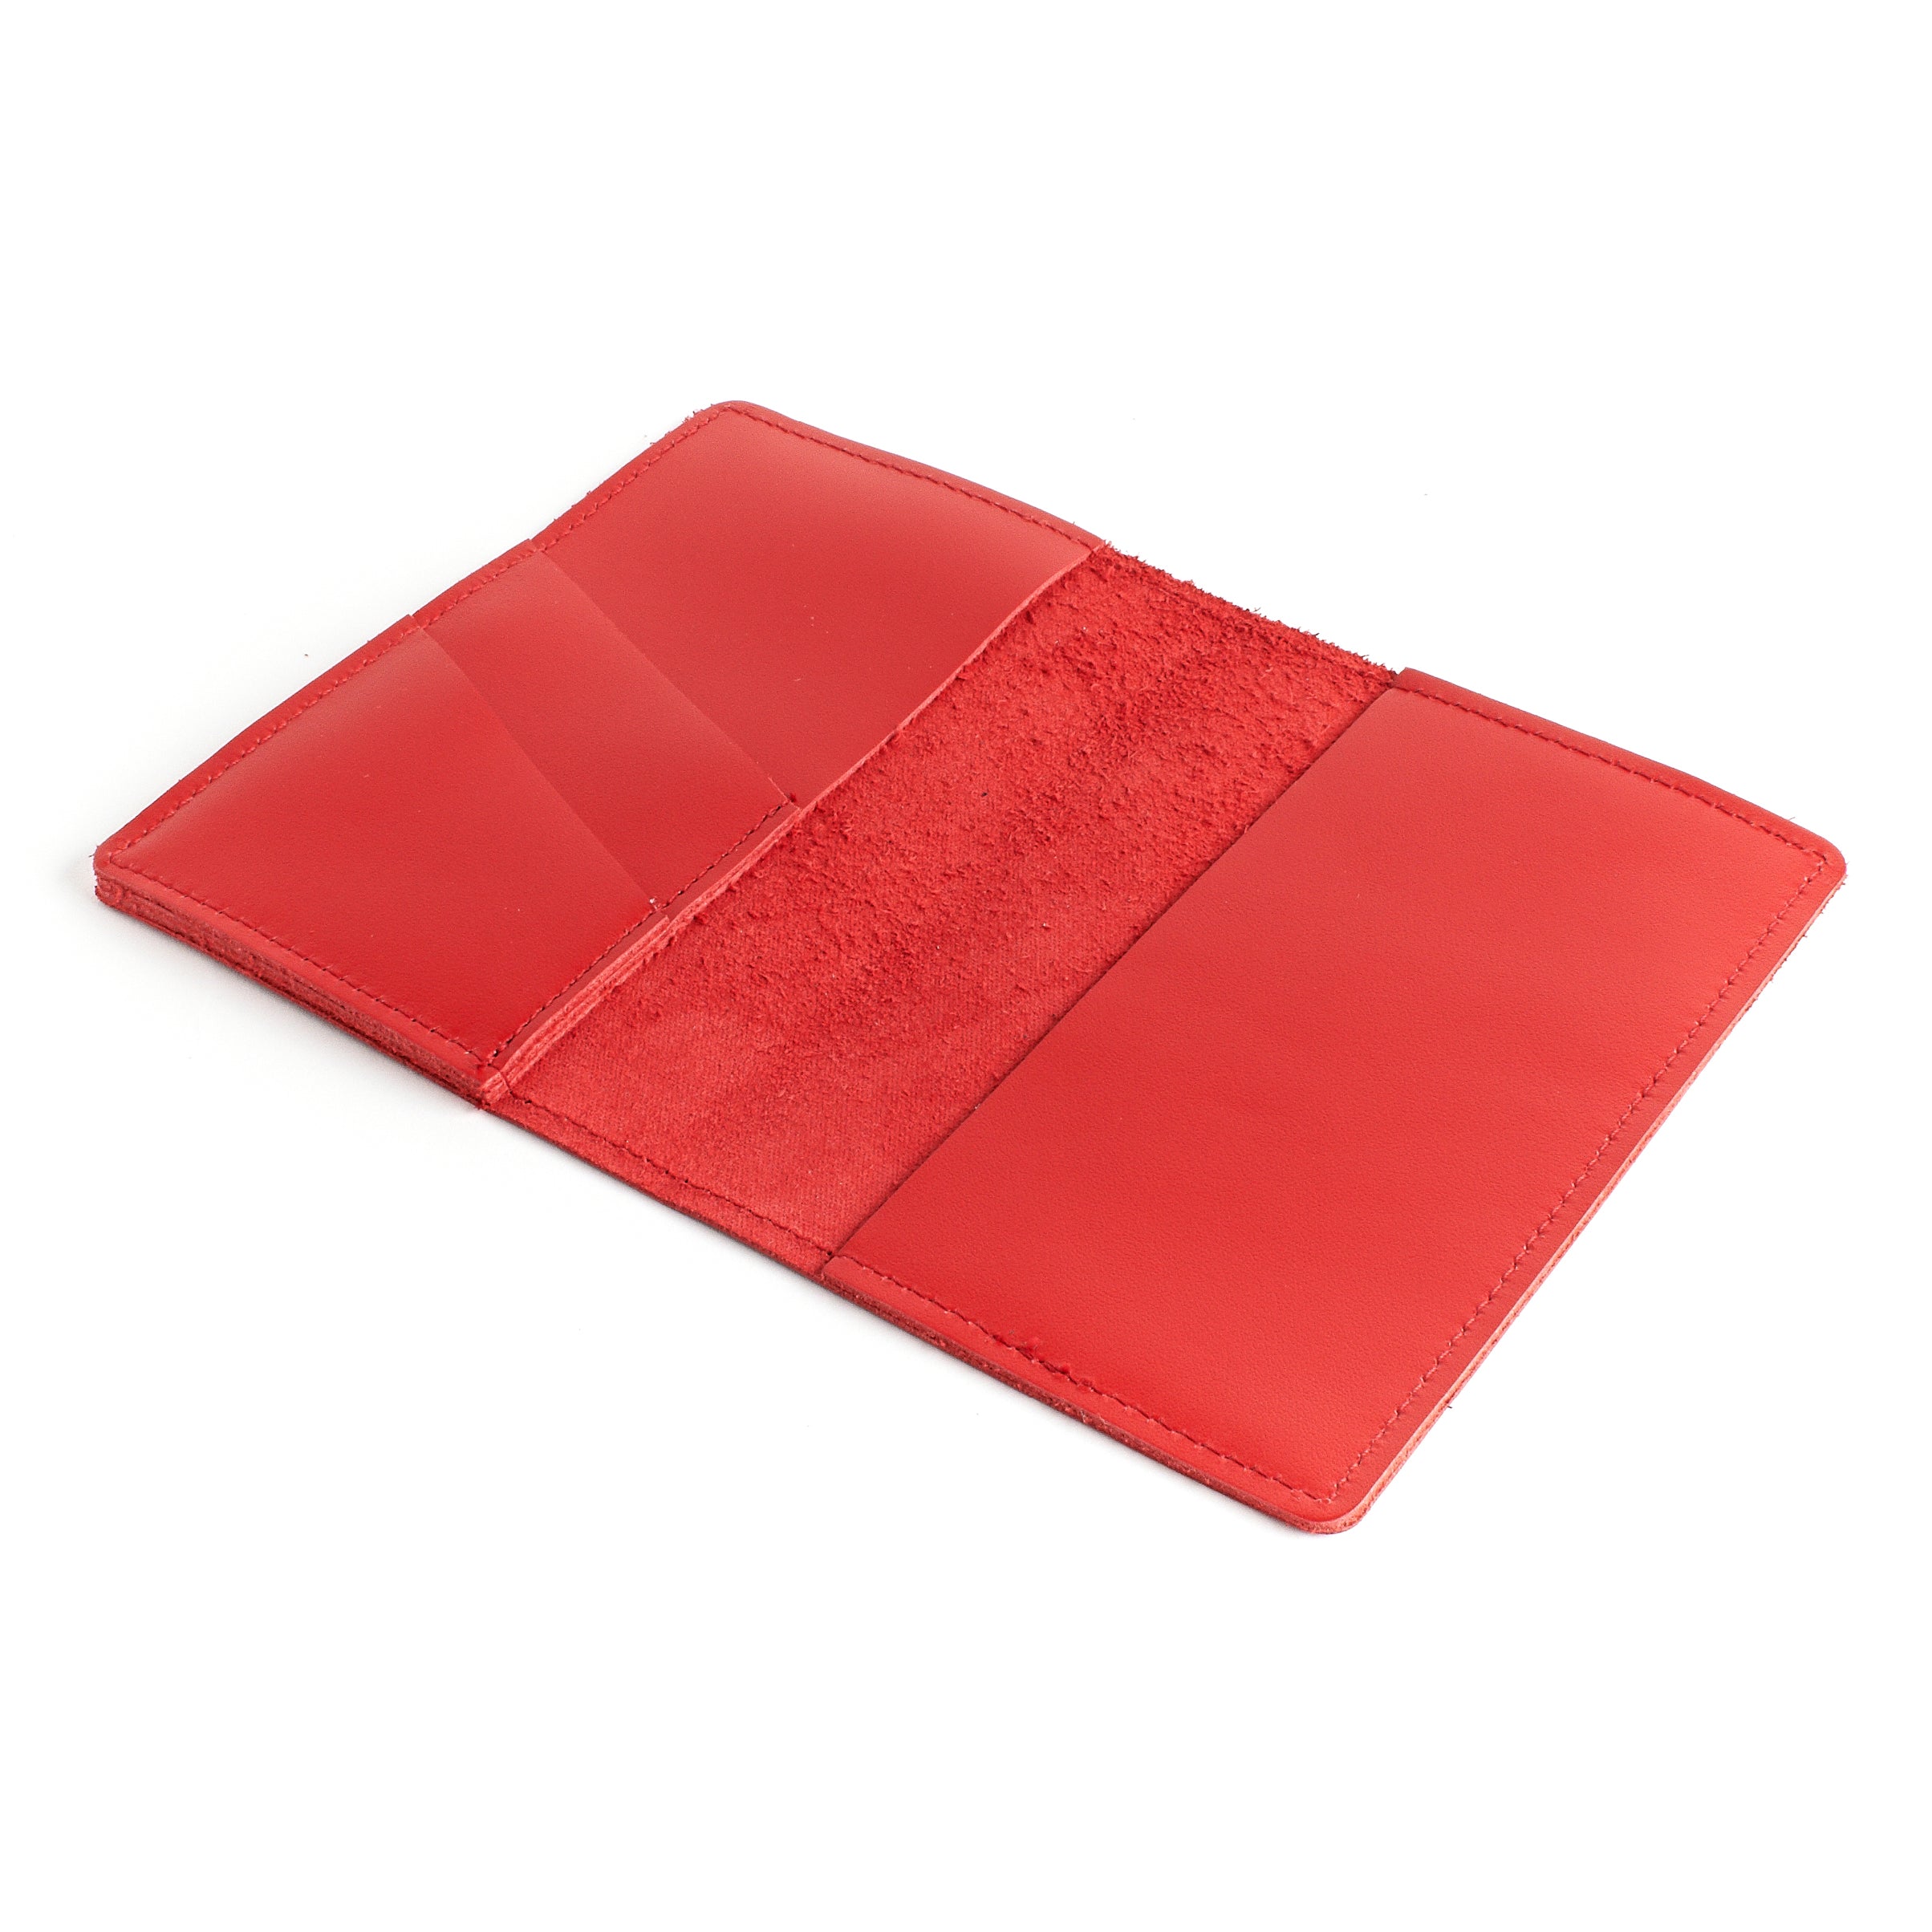 Smooth Red Leather Passport Holder